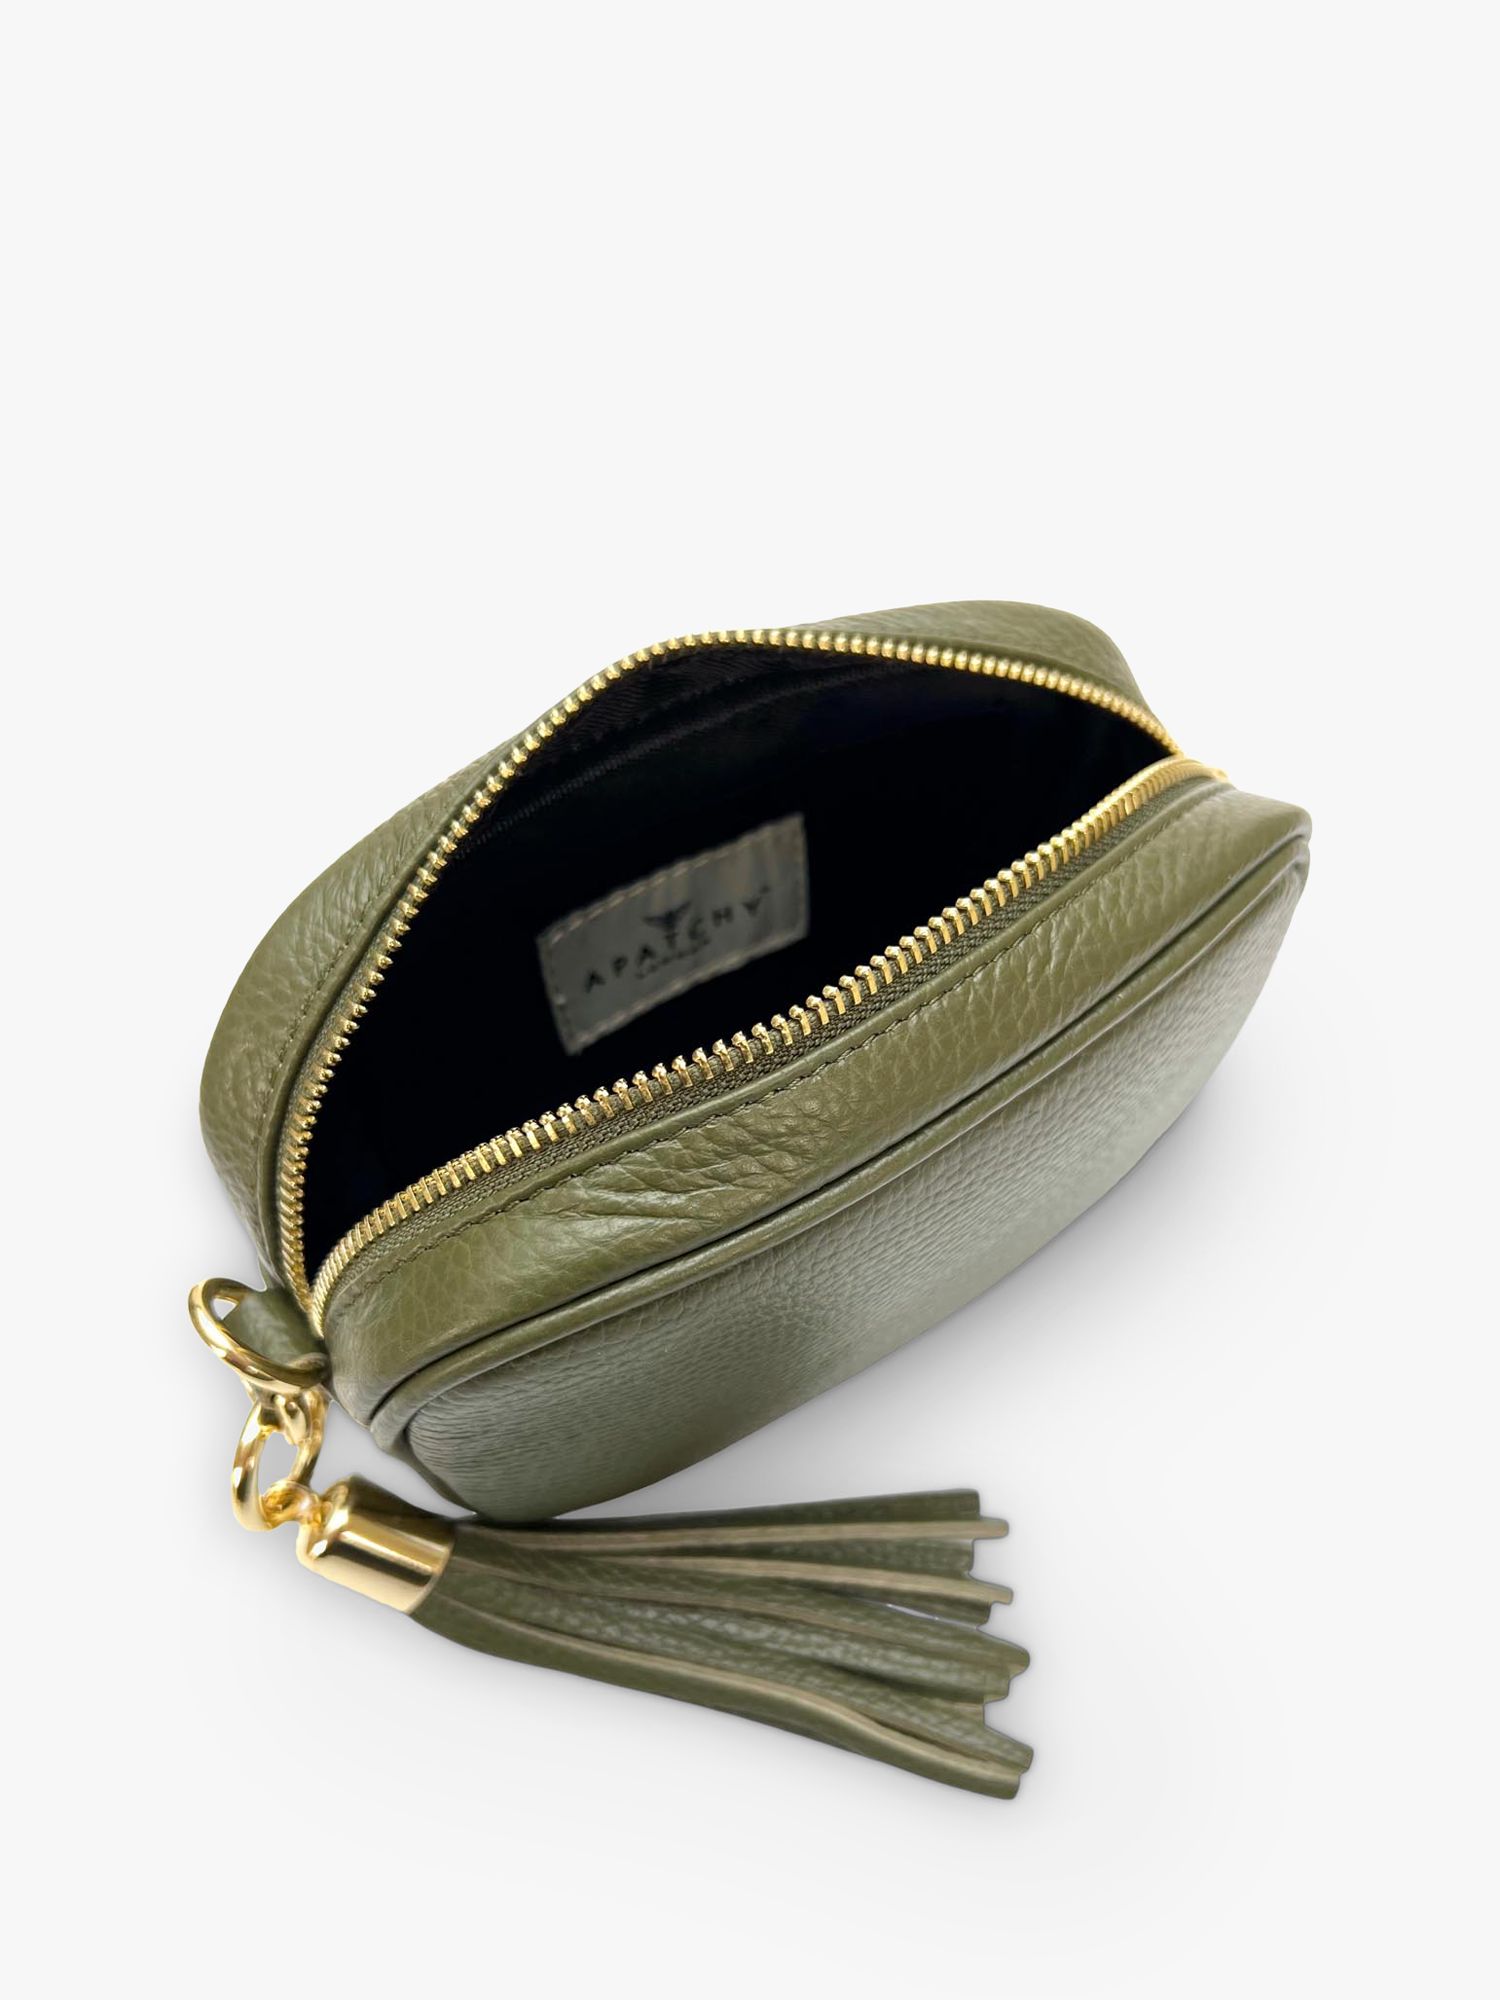 Apatchy The Mini Tassel Leather Crossbody Phone Bag, Olive Green